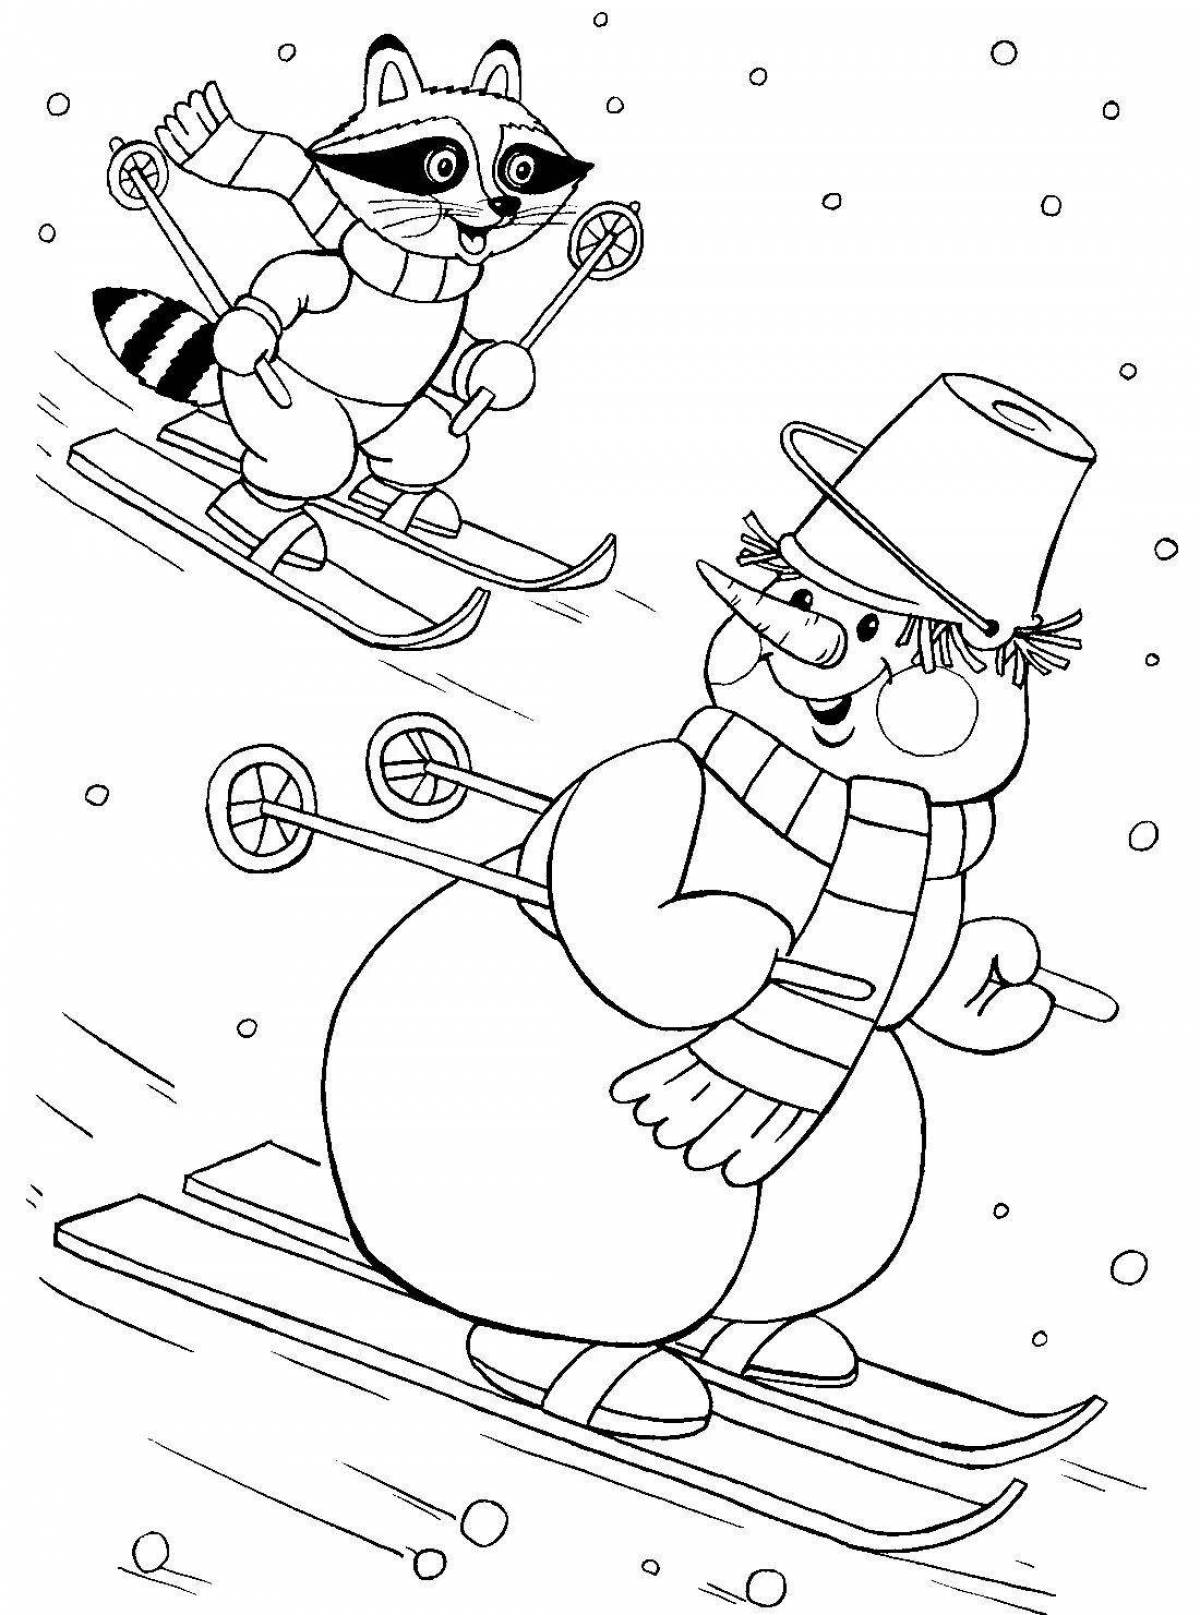 Coloring page shimmering snowman on a sled